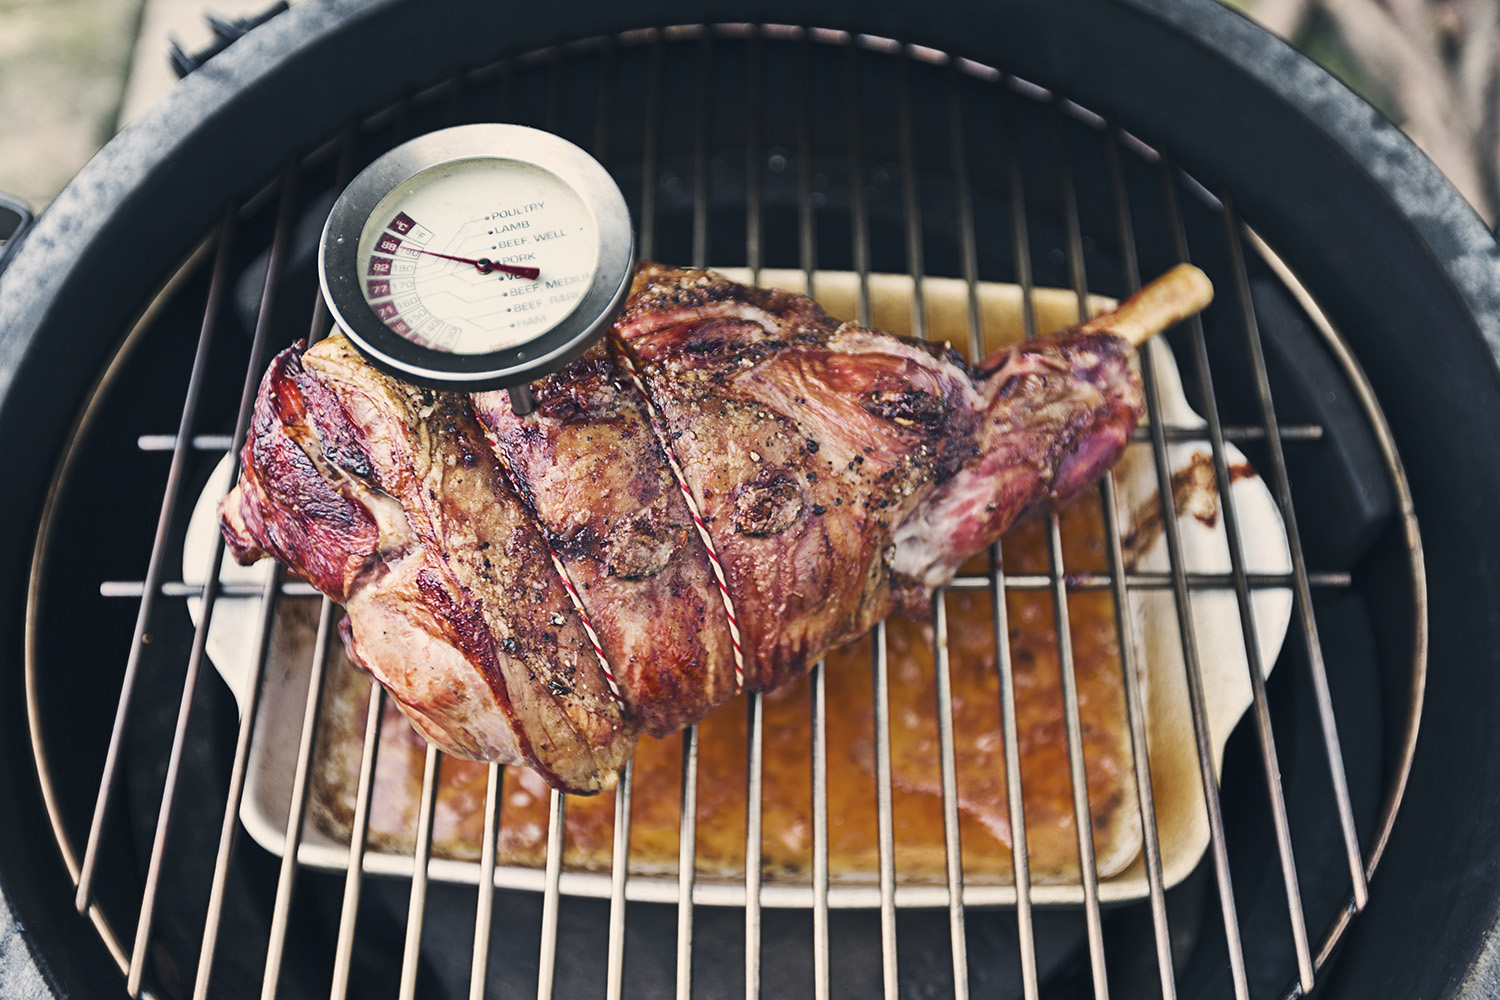 https://www.themanual.com/wp-content/uploads/sites/9/2019/01/barbecue-grill-lamb-meat-thermometer.jpg?fit=1500%2C1000&p=1